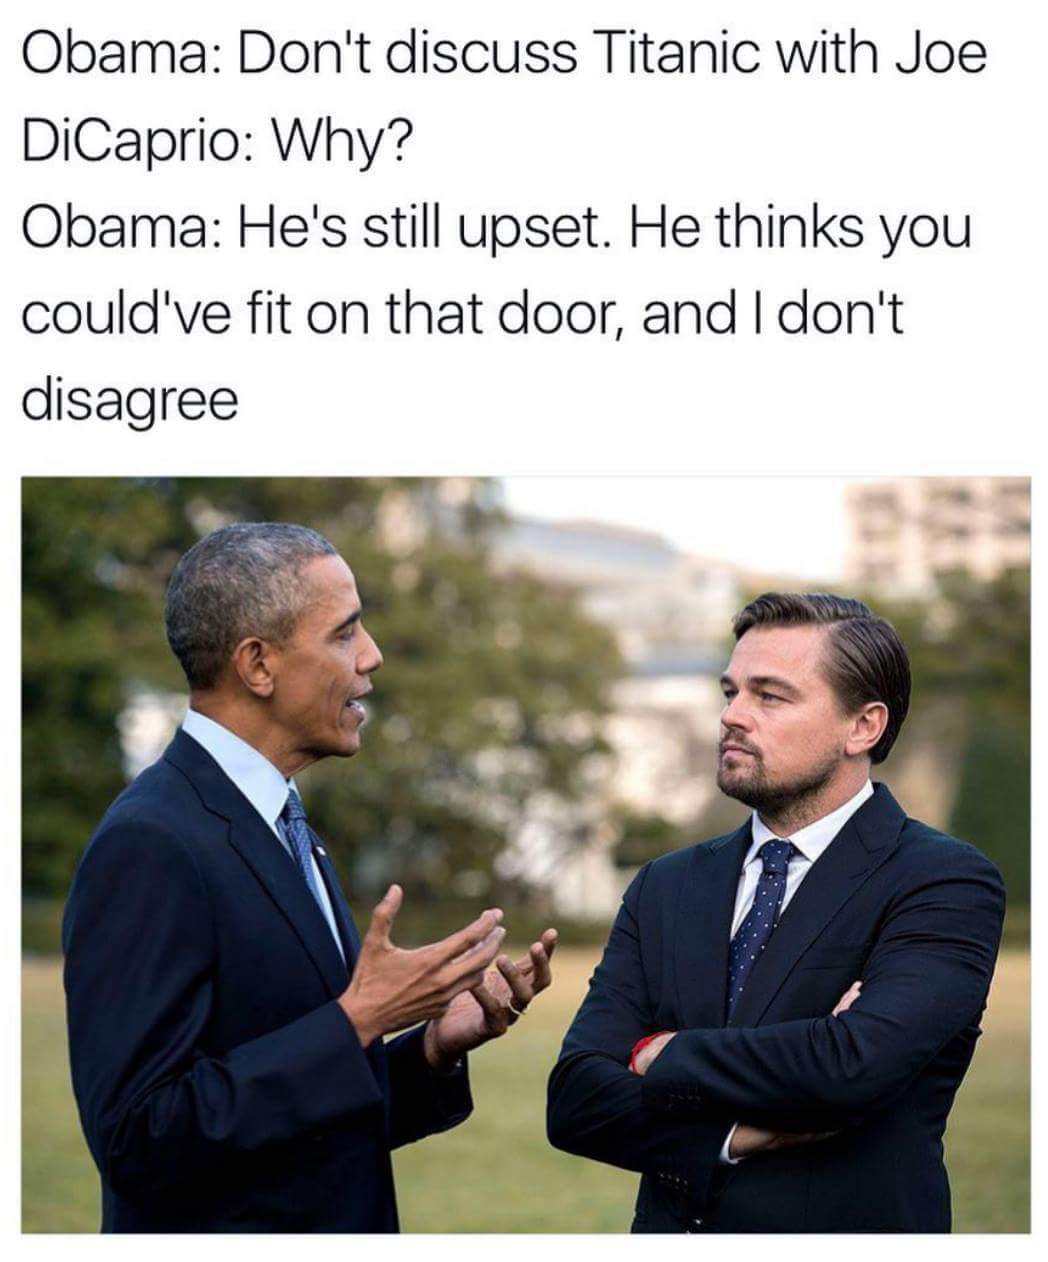 leonardo dicaprio obama - Obama Don't discuss Titanic with Joe DiCaprio Why? Obama He's still upset. He thinks you could've fit on that door, and I don't disagree